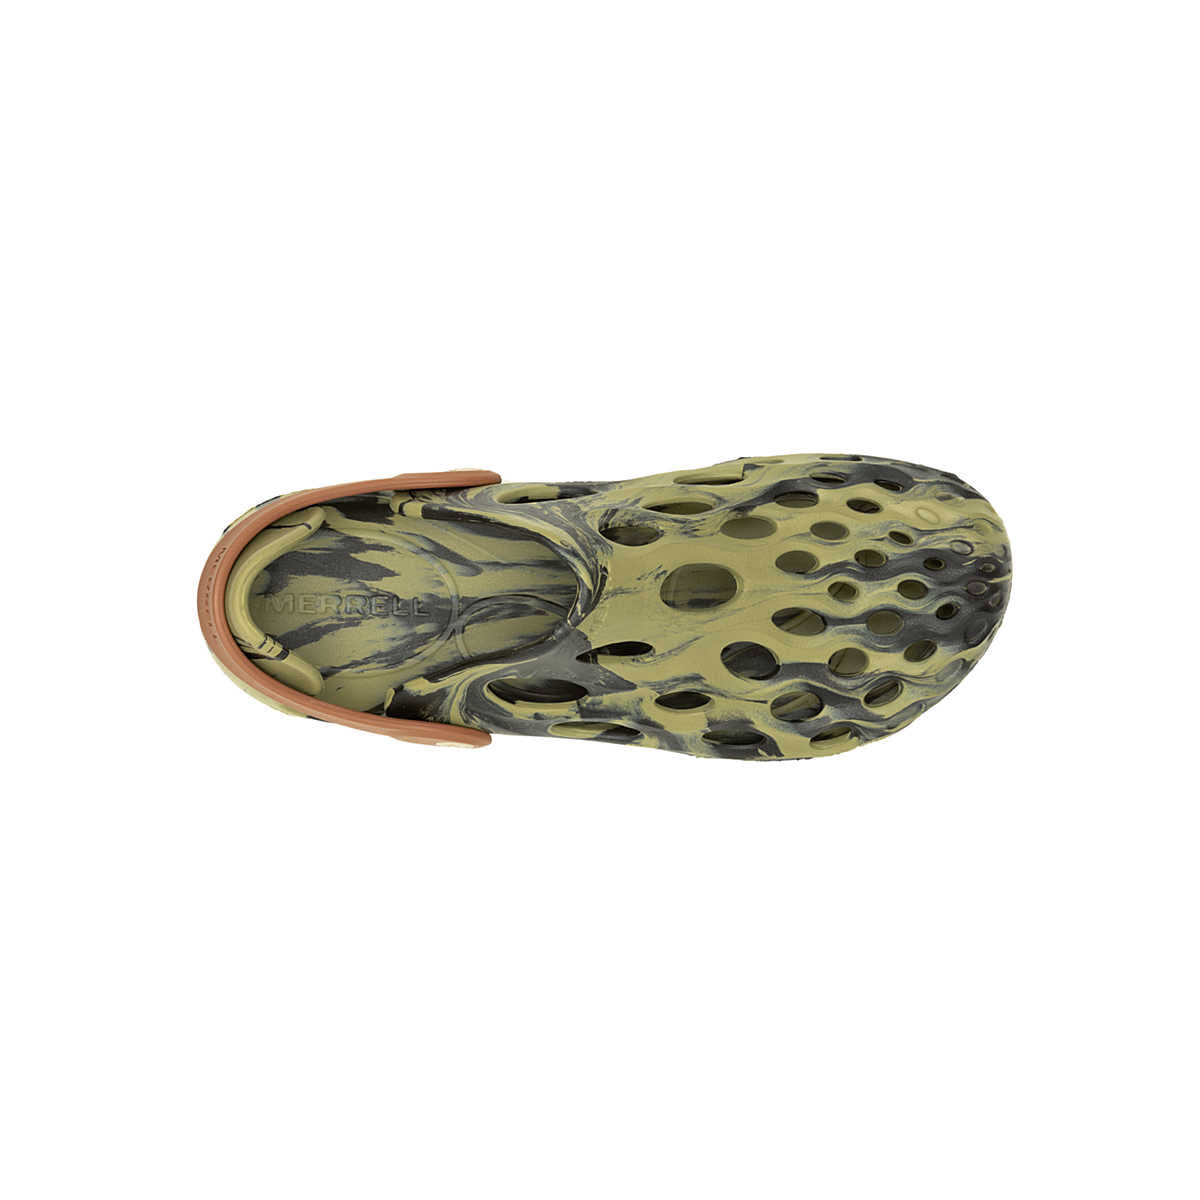 A single camouflage-patterned Merrell Hydro Moc with numerous ventilation holes and a pivoting heel strap, displayed against a white background.